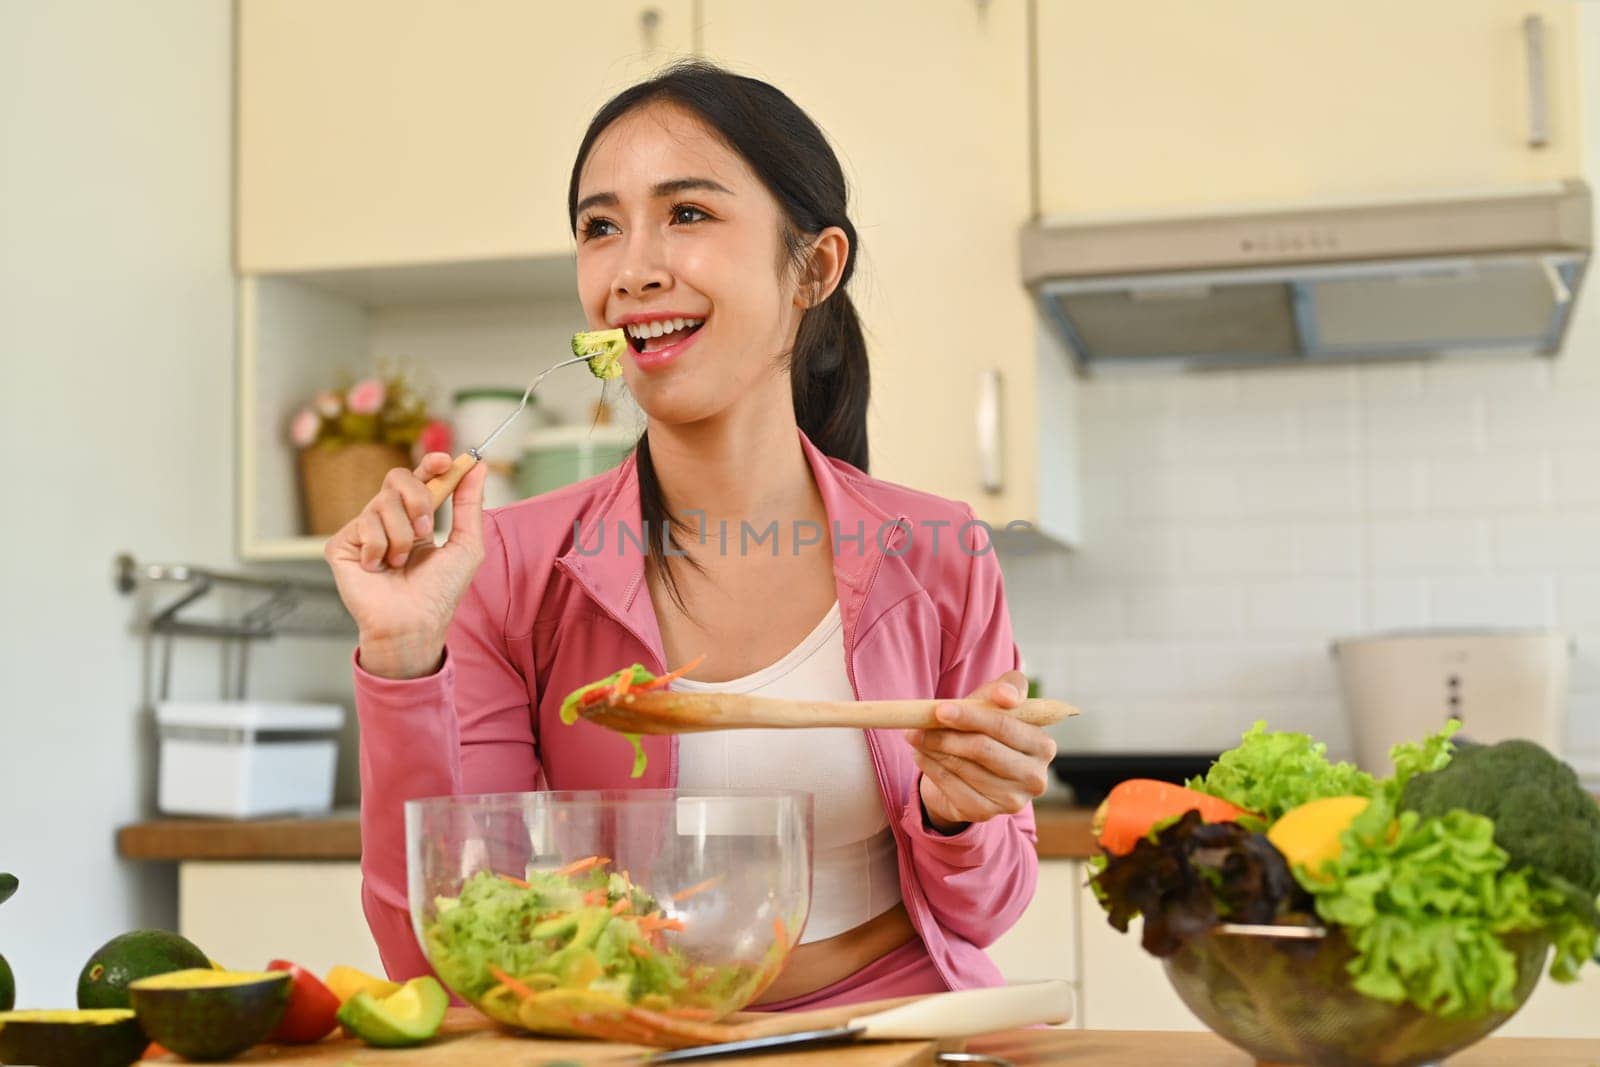 Portrait sporty woman eating vegetable salad in the kitchen. Dieting, health lifestyle and nutrition concept.